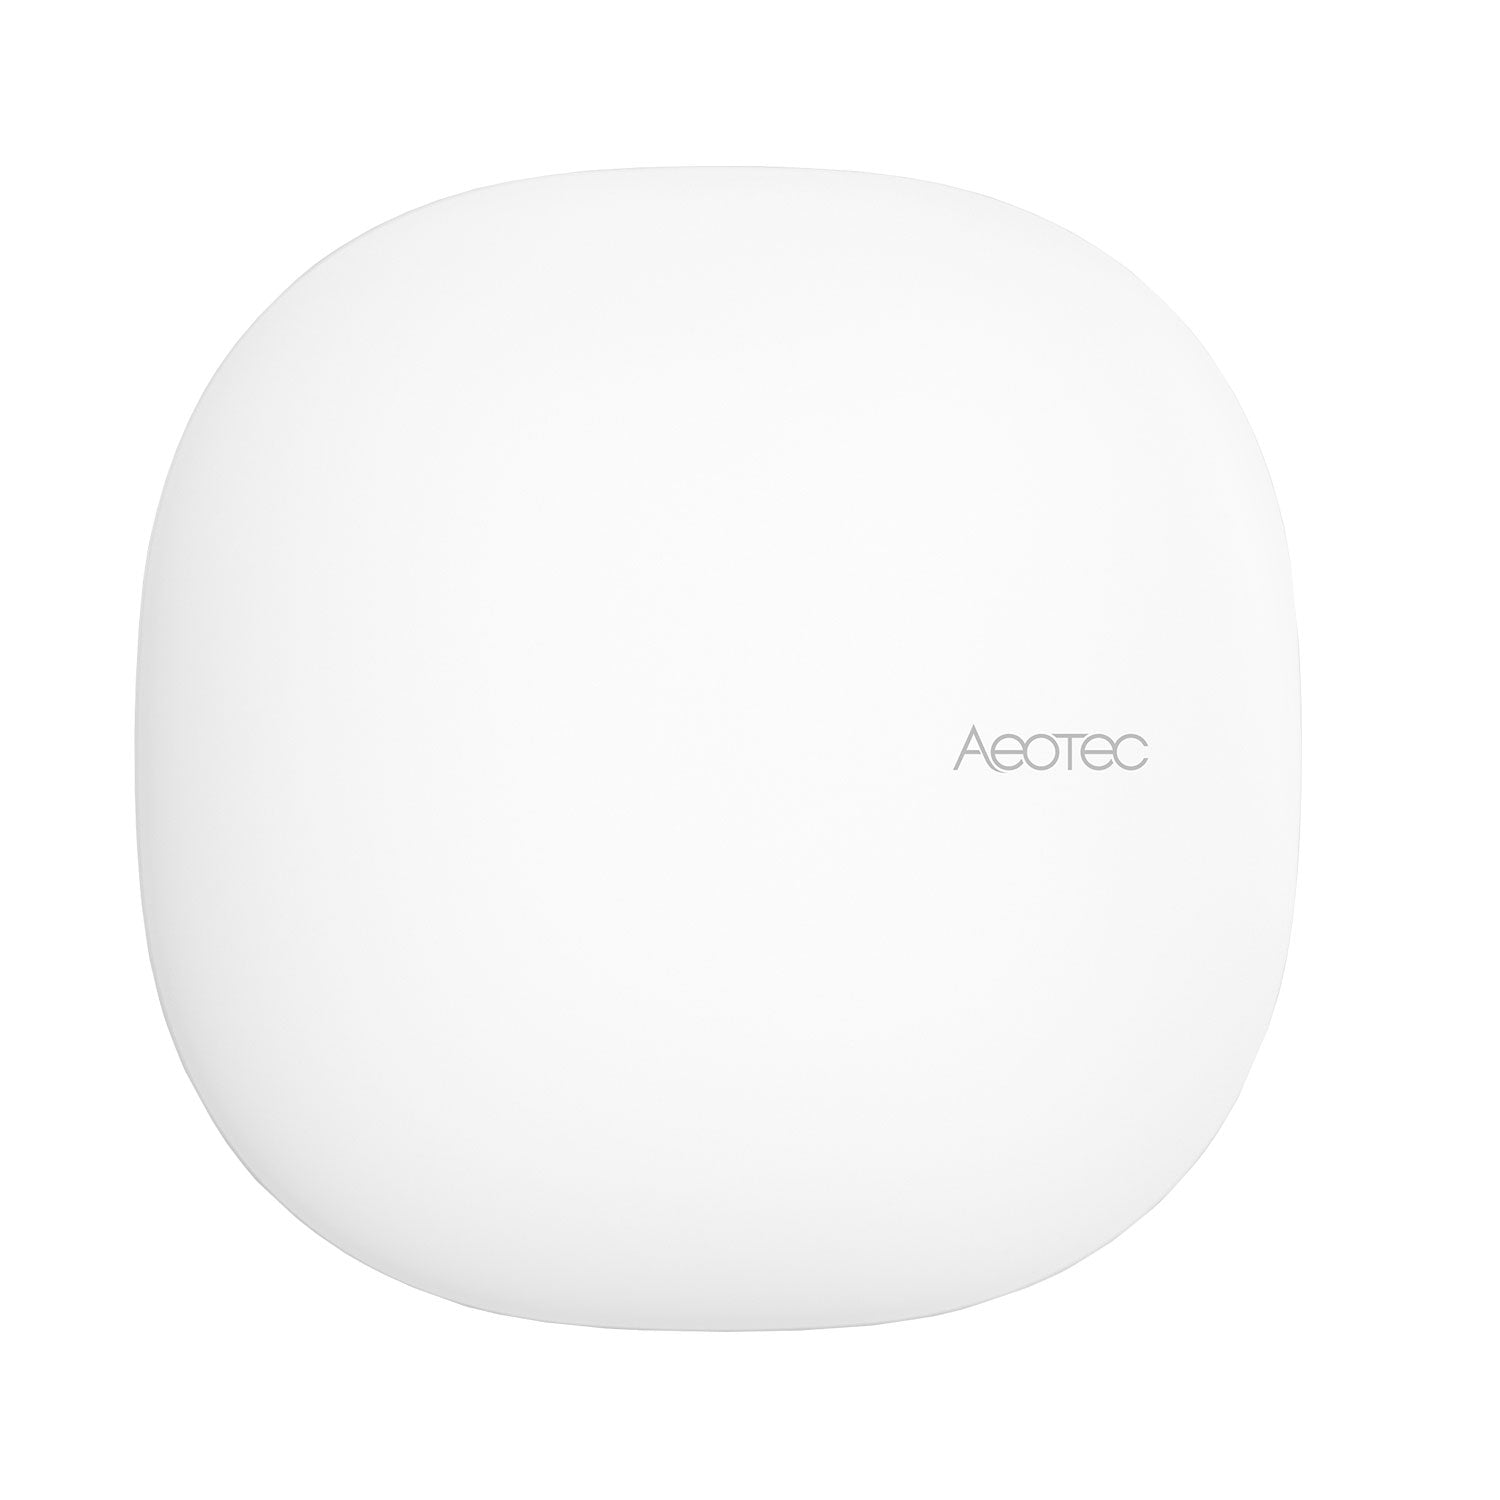 Aeotec Smart Home Hub - Works as a SmartThings Hub Frontansicht